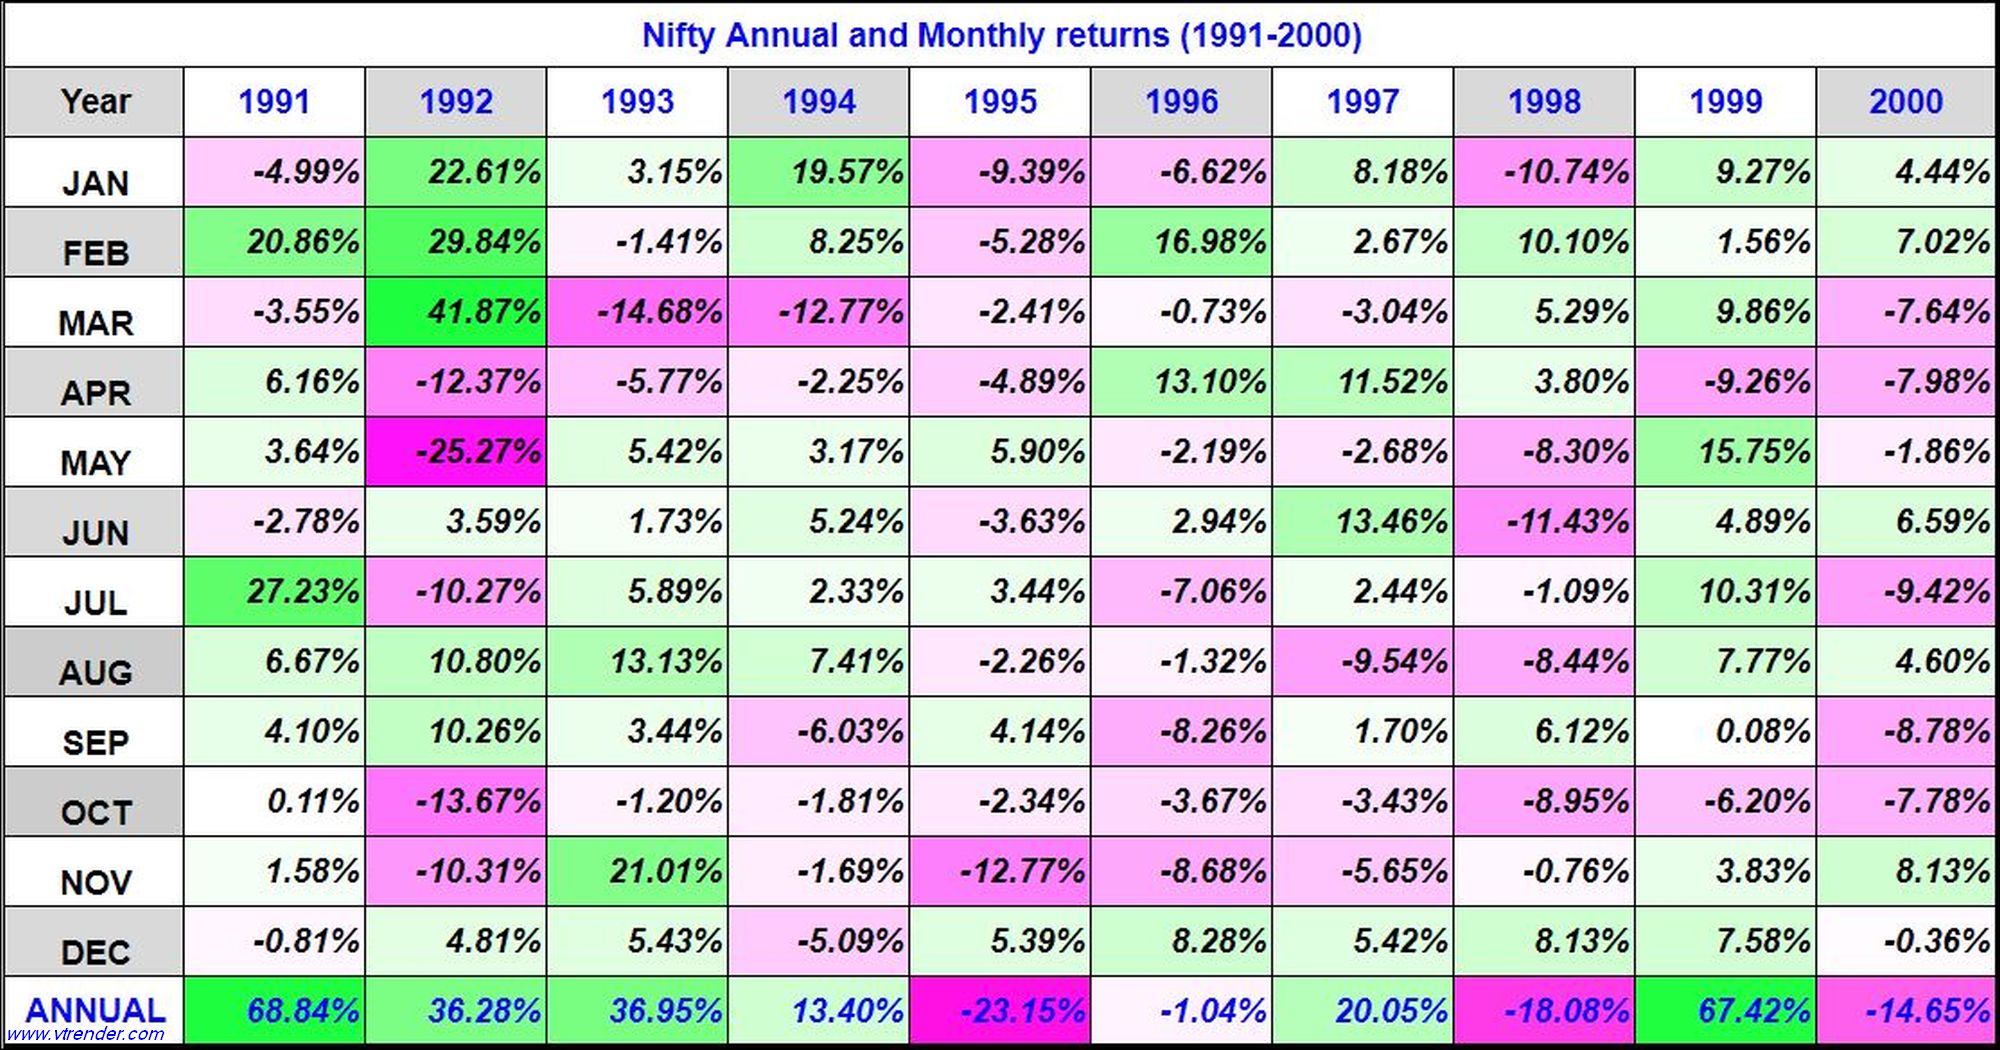 Niftyreturns1991 2000 Nifty 50 Monthly And Annual Returns (1991-2022) - 30Th Jun 2022 Annual, Monthly, Nifty Returns